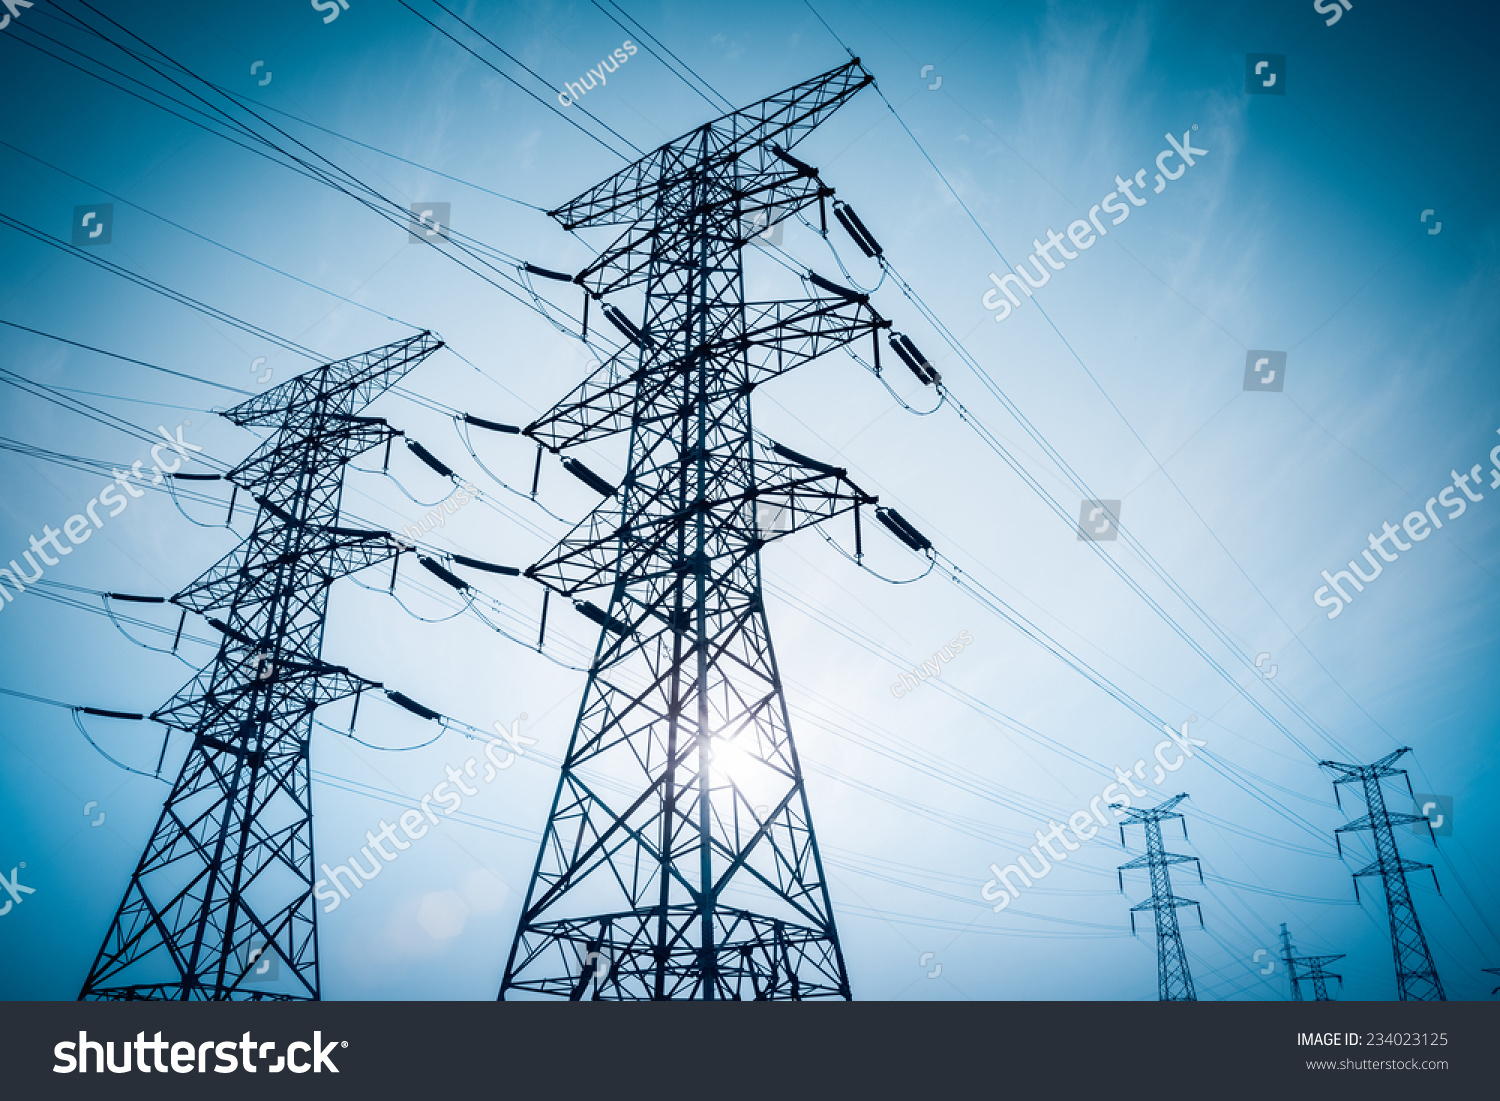 electricity transmission pylon silhouetted against blue sky at dusk  #234023125